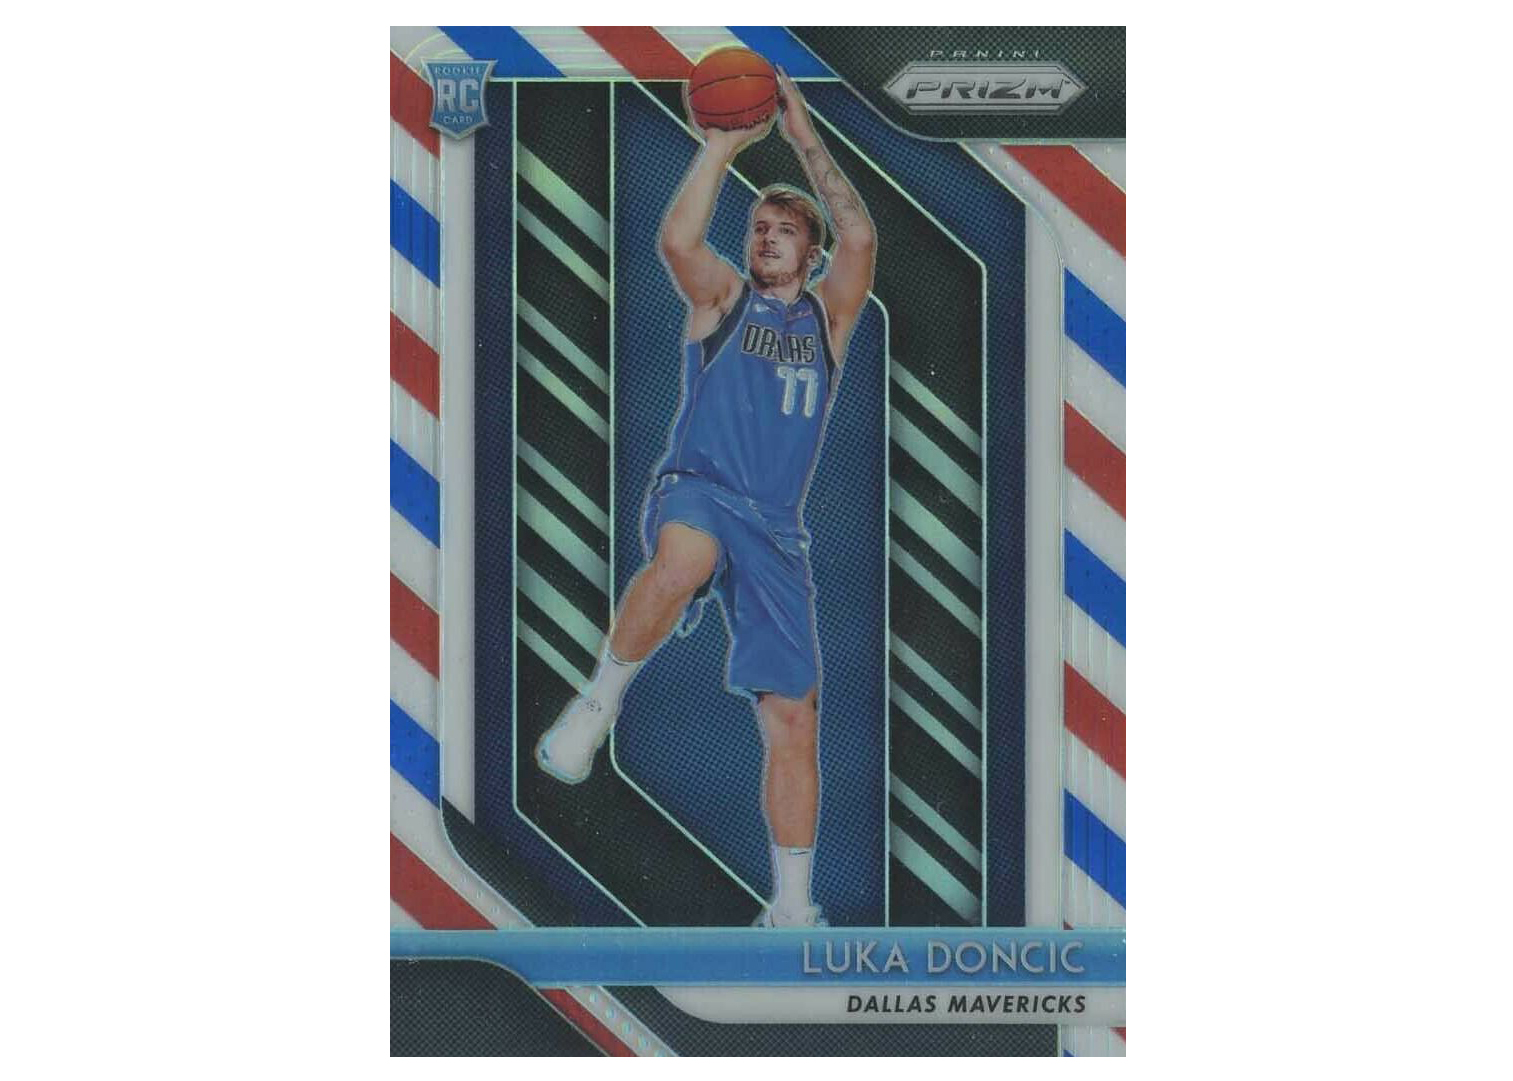 Luka Doncic 2018 Panini Prizm Rookie Red/White/Blue #280 (Ungraded